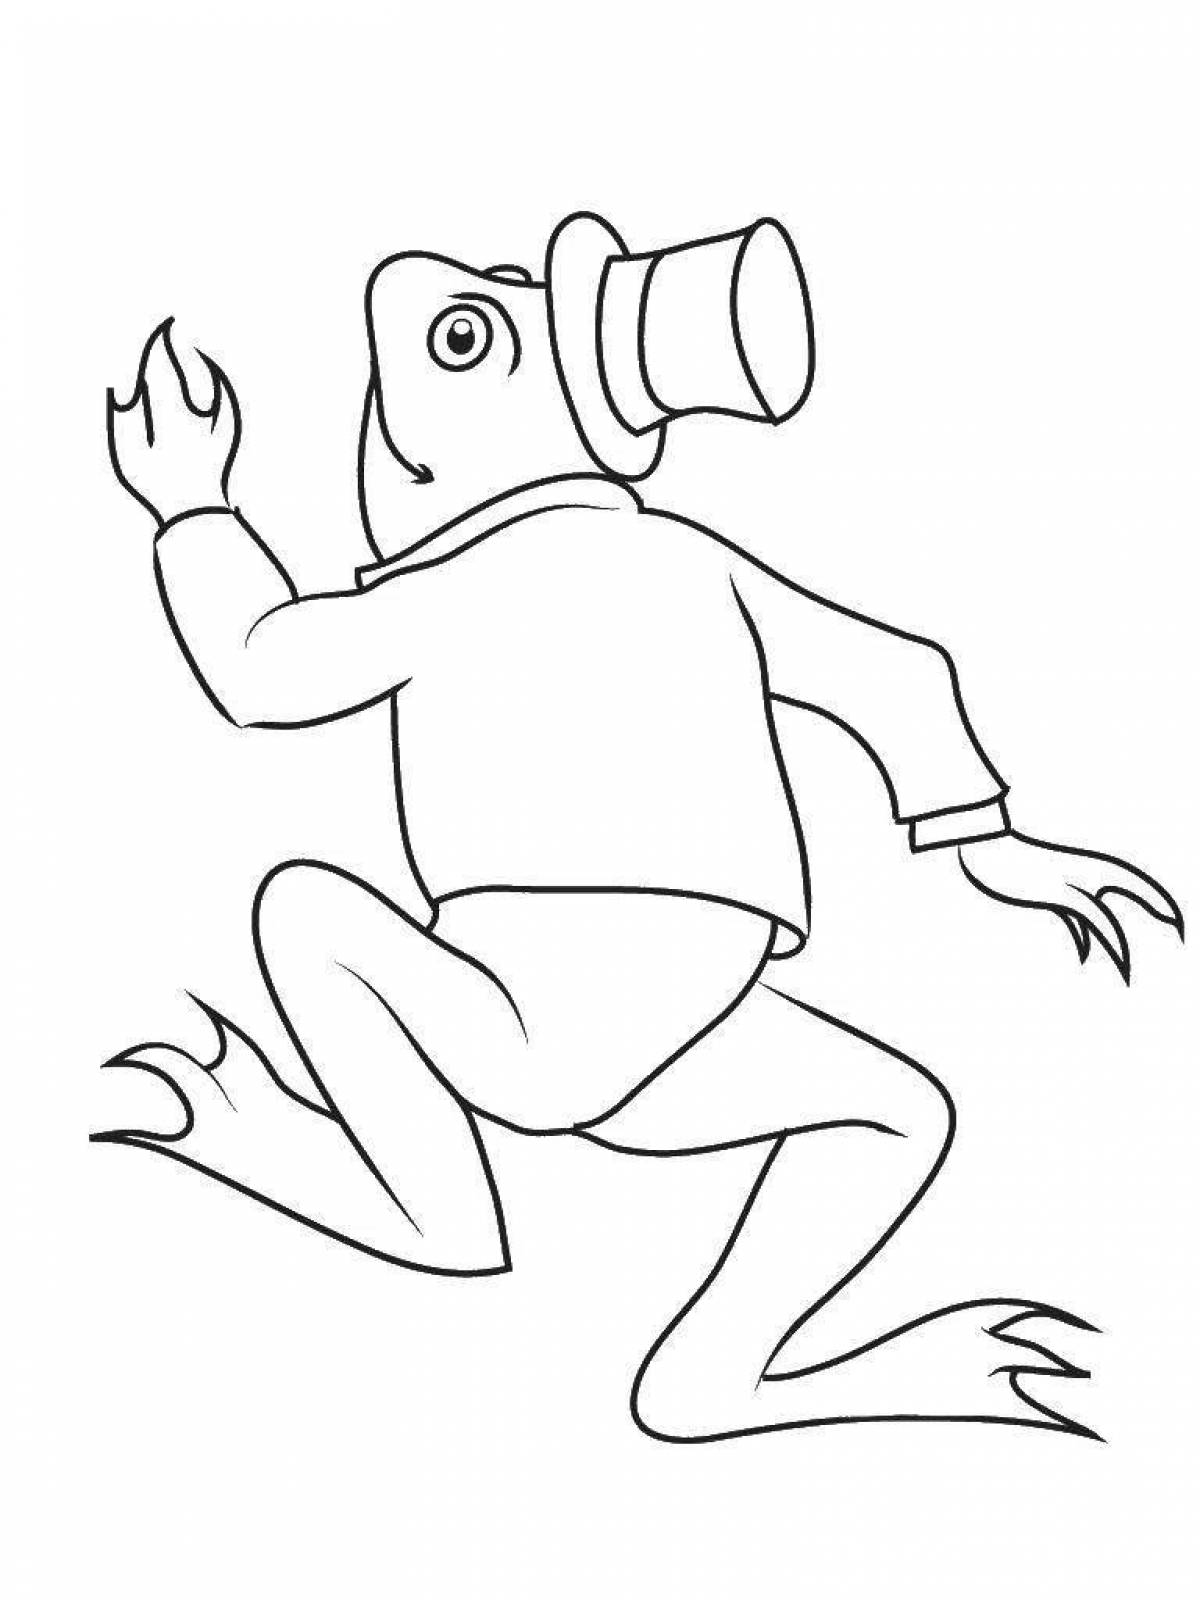 Adorable crazy frog coloring page